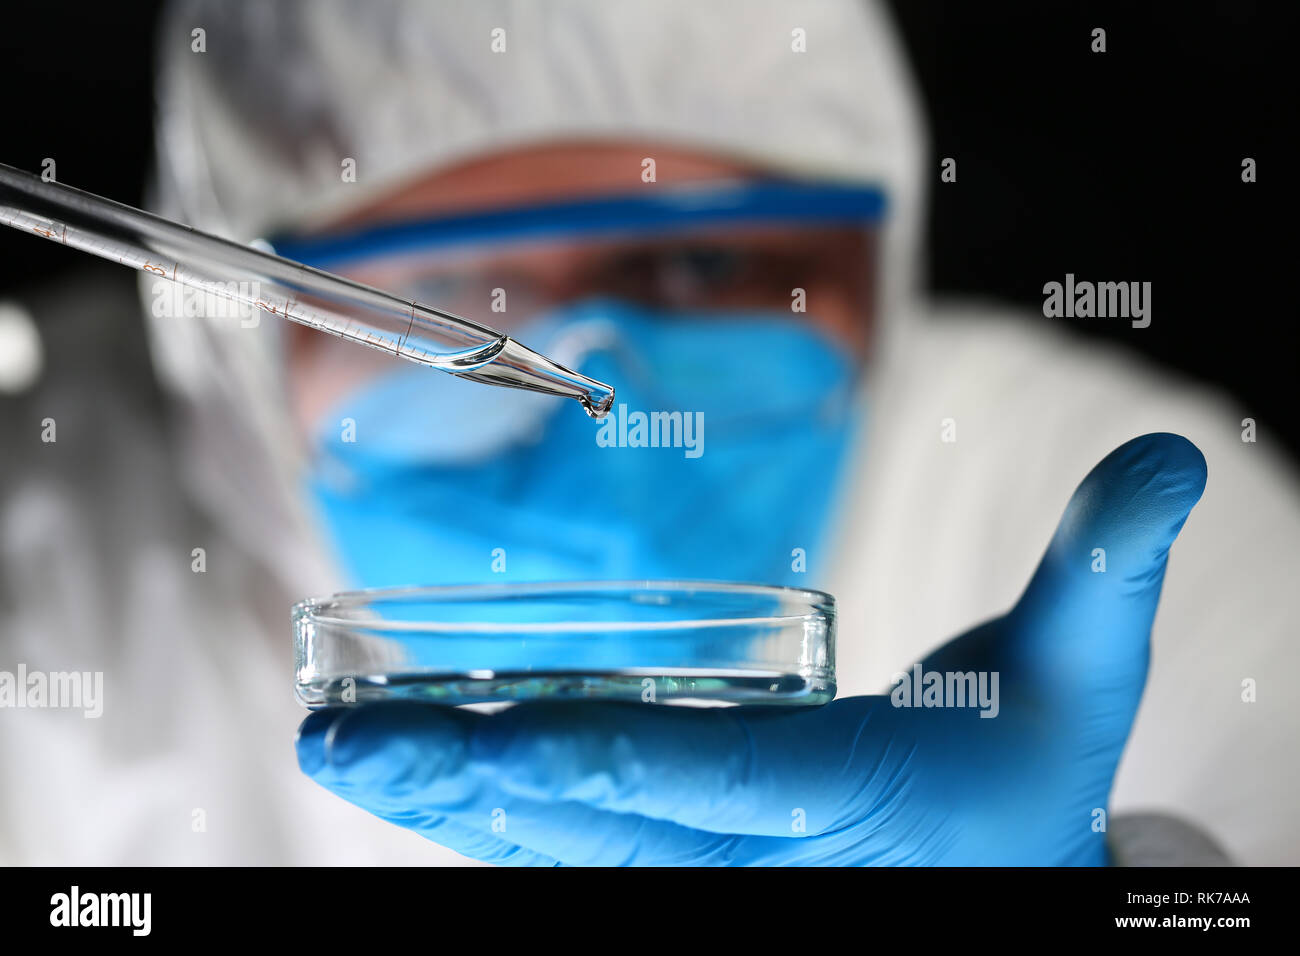 Male chemist look at microscope hold test tube Stock Photo